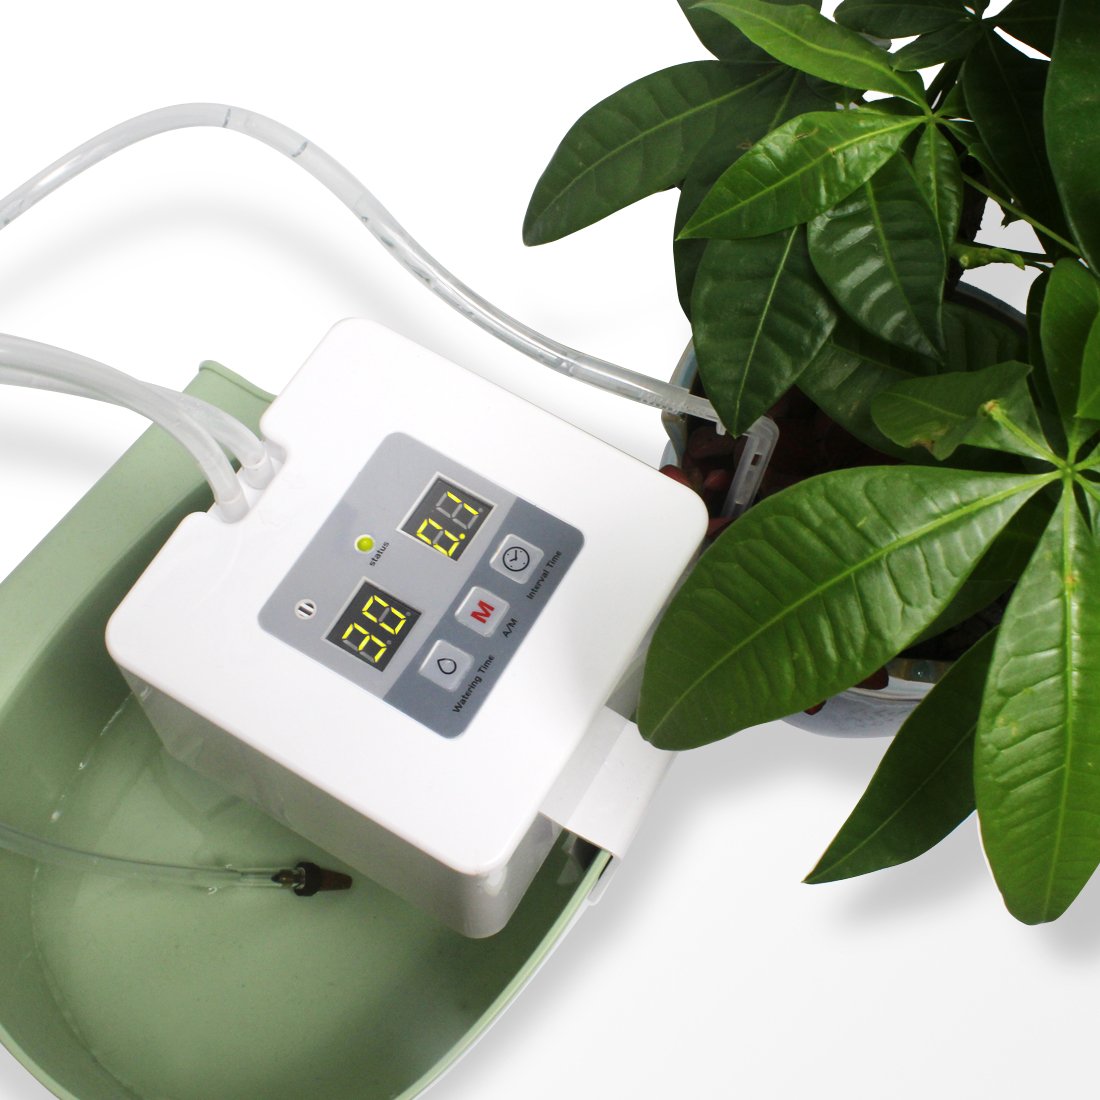 Indoor Watering System with Water Timer Automatic Drip Irrigation Kit